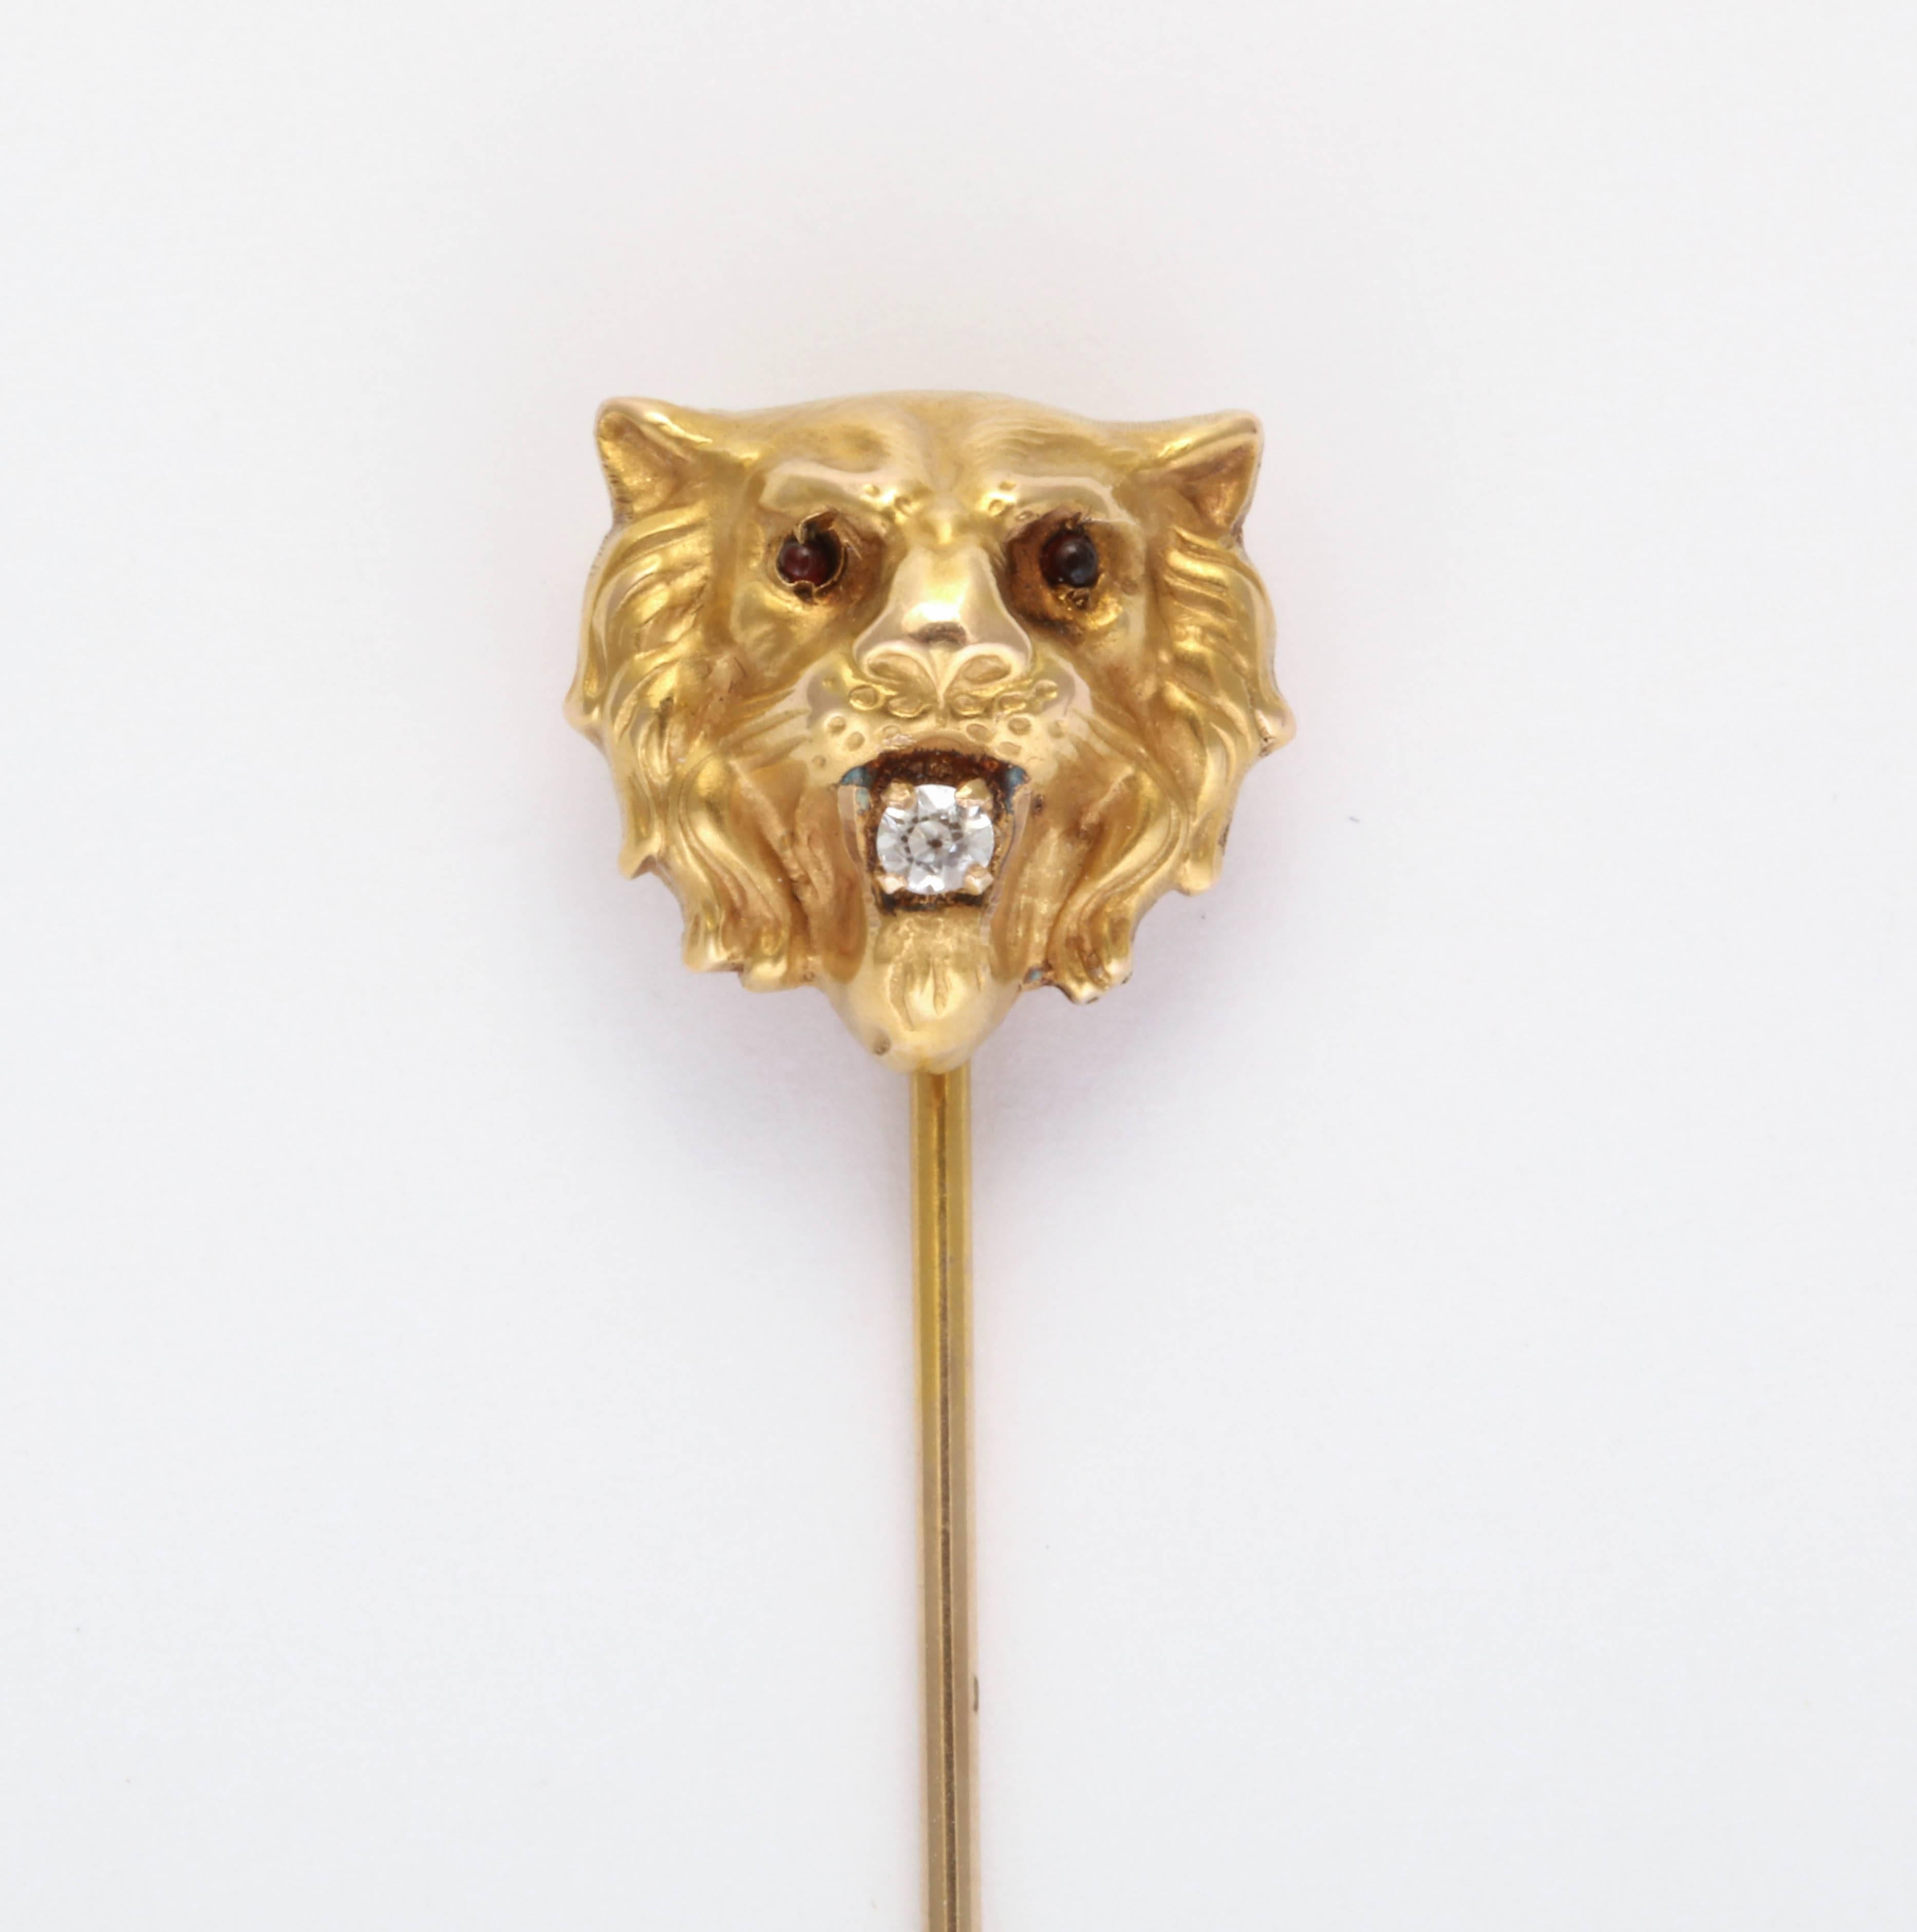 Lion Stickpin. Eyes set with cabochon garnets and mouth set with a small old cut diamond. 